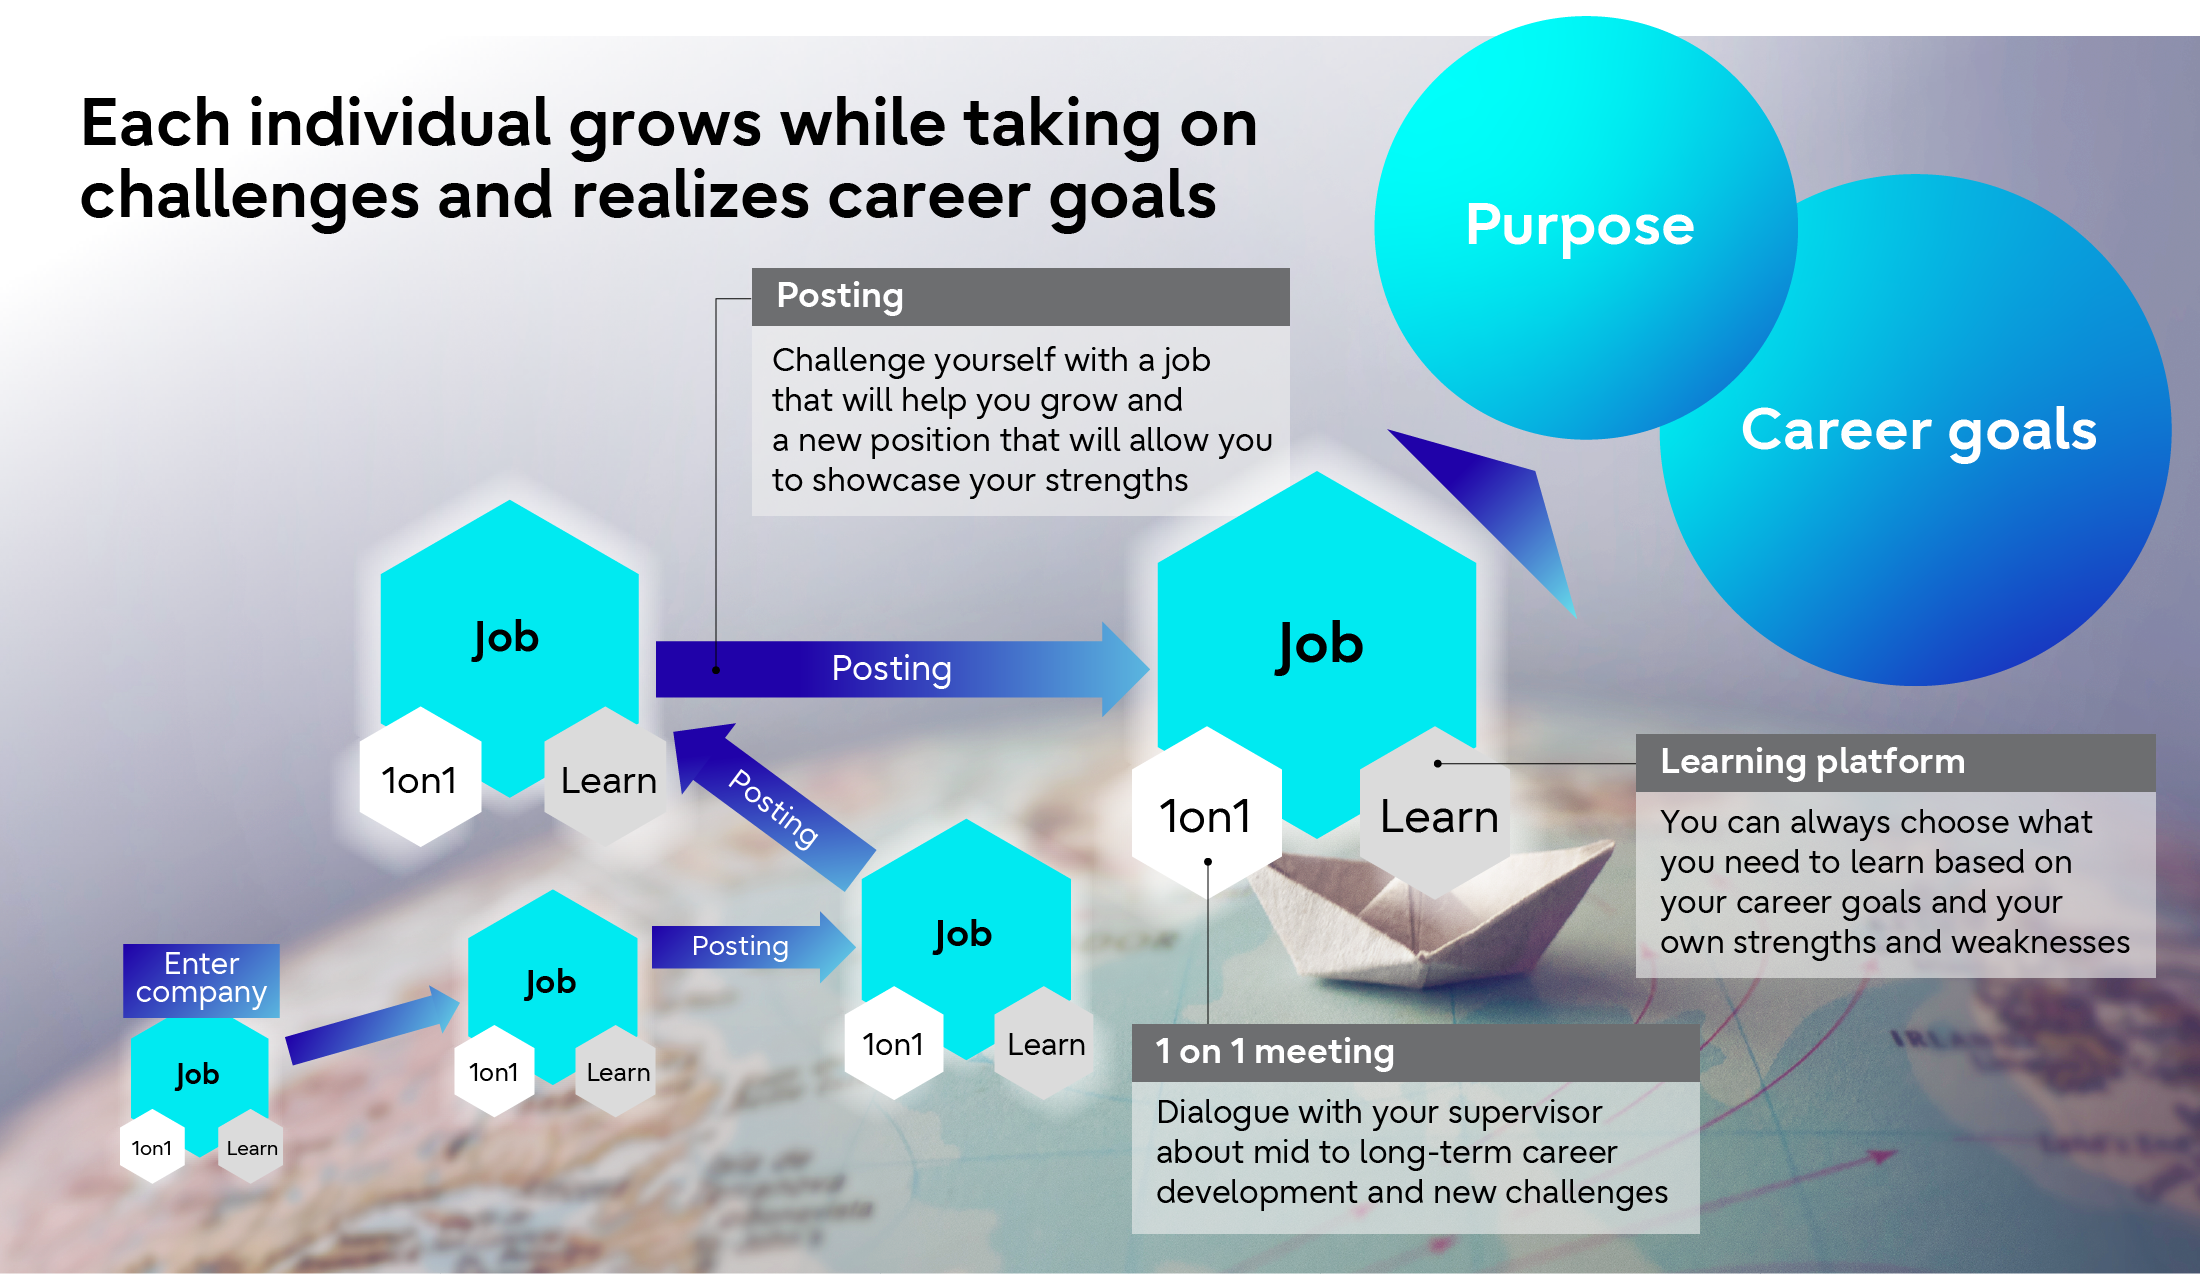 Framework for Supporting the Career Realization of Each and Every Employee